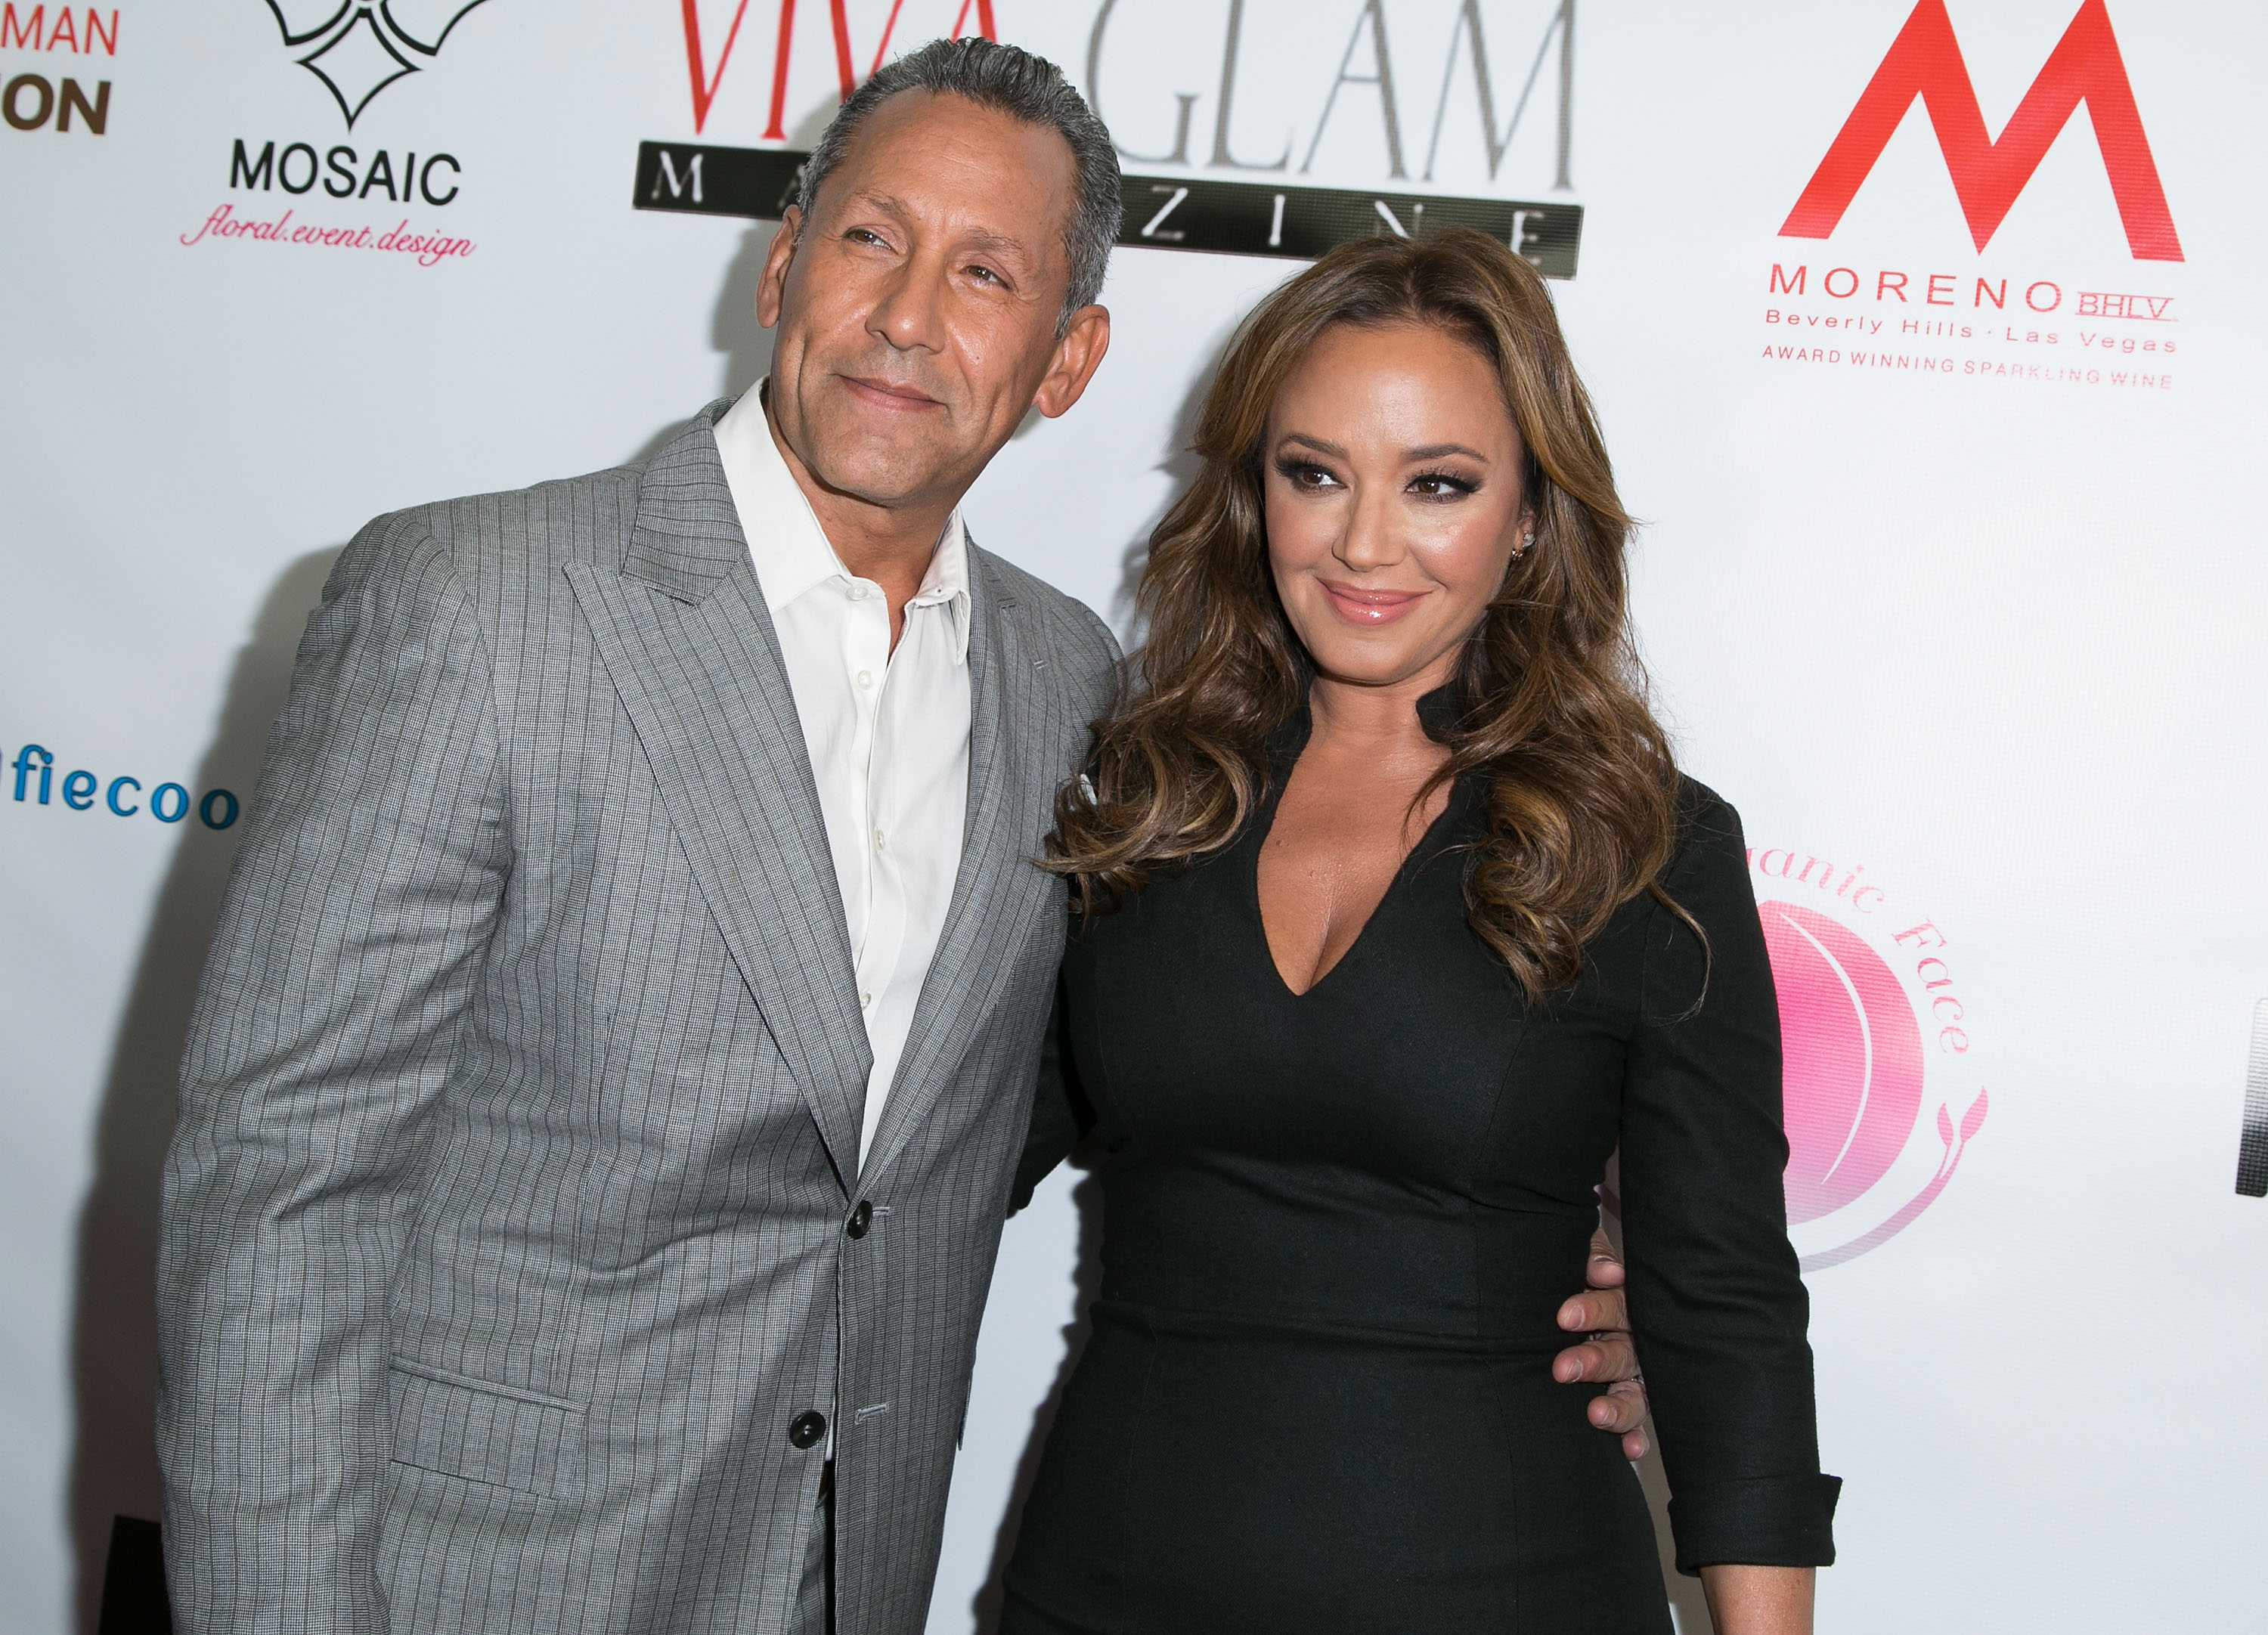 Leah Remini and her husband Angelo Pagan, who has three children from a previous relationship, attend the launch of VIVA GLAM Magazine's Celebrity Issue